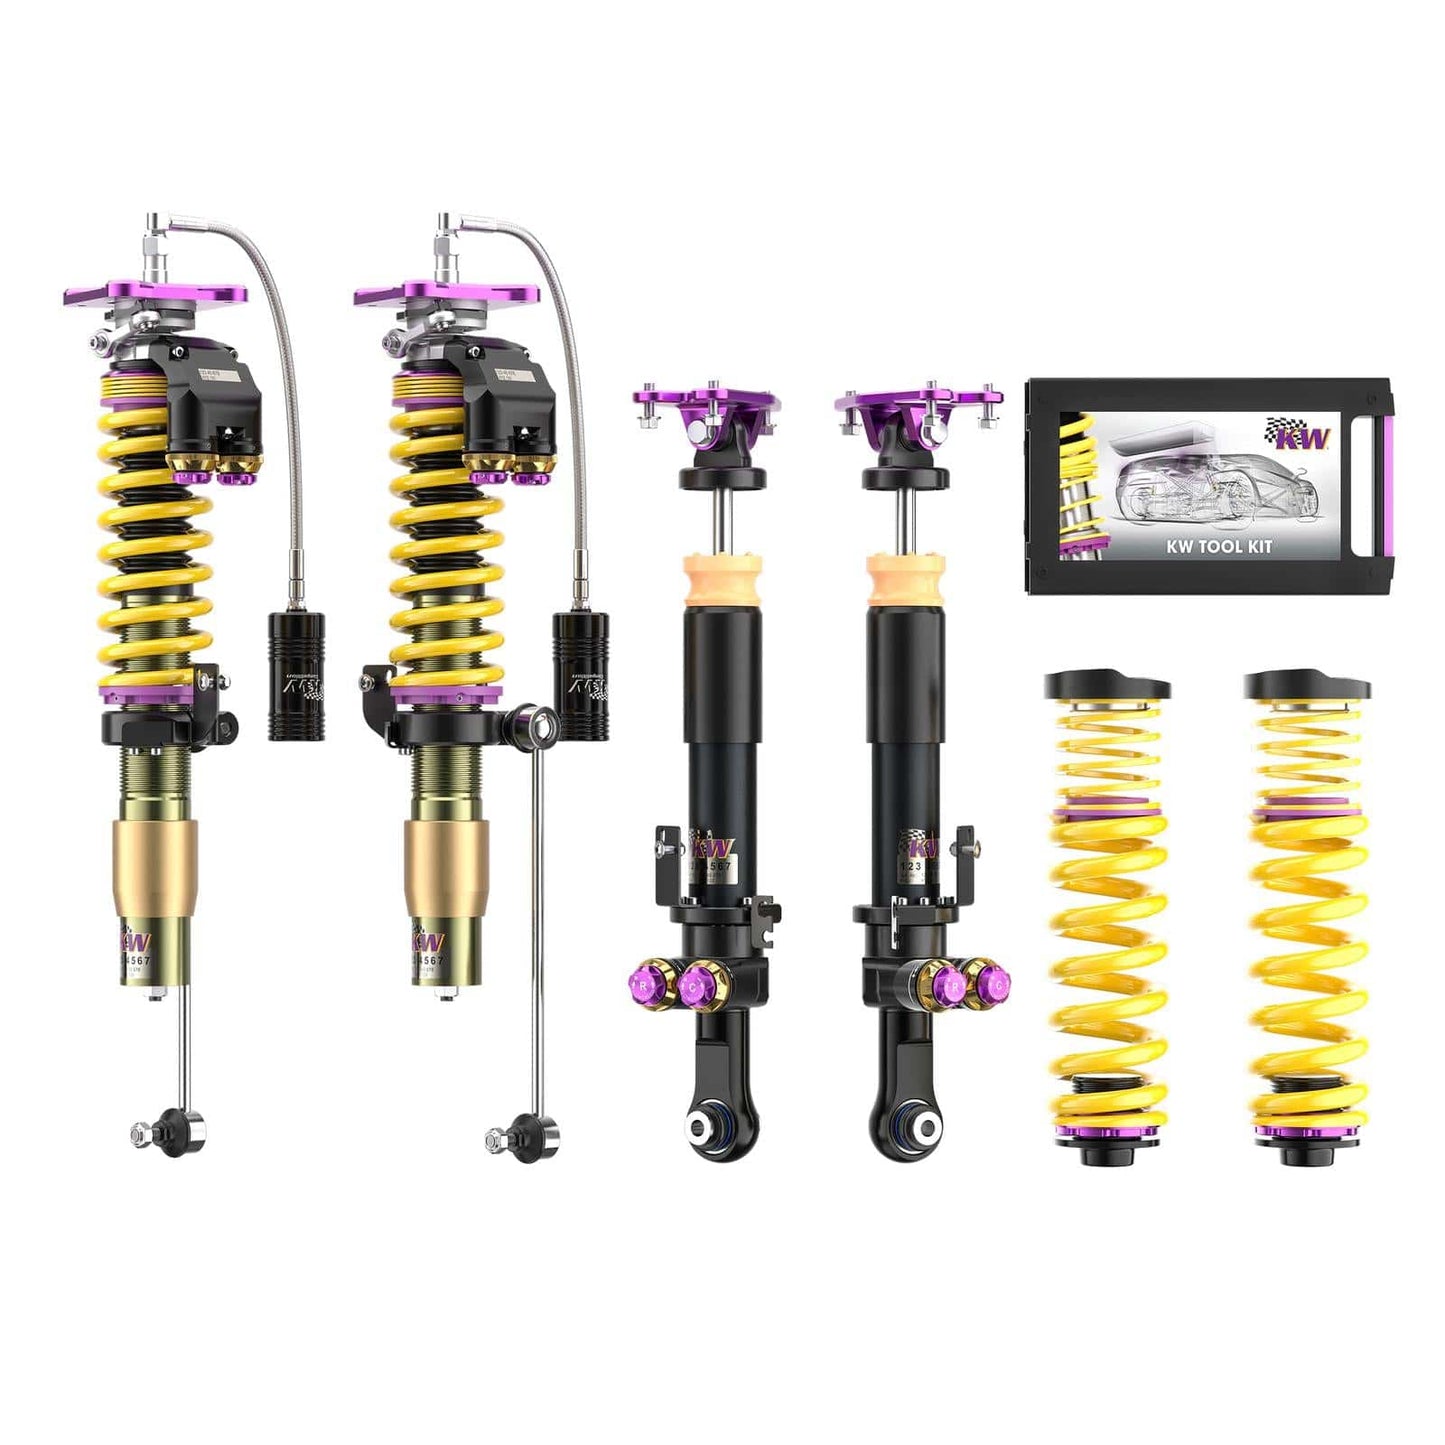 KW 30901200EB BMW G80 G87 Variant 5 Clubsport Coilover Kit - With EDC Delete (Inc. M2, M3 Competition & M4 Competition)